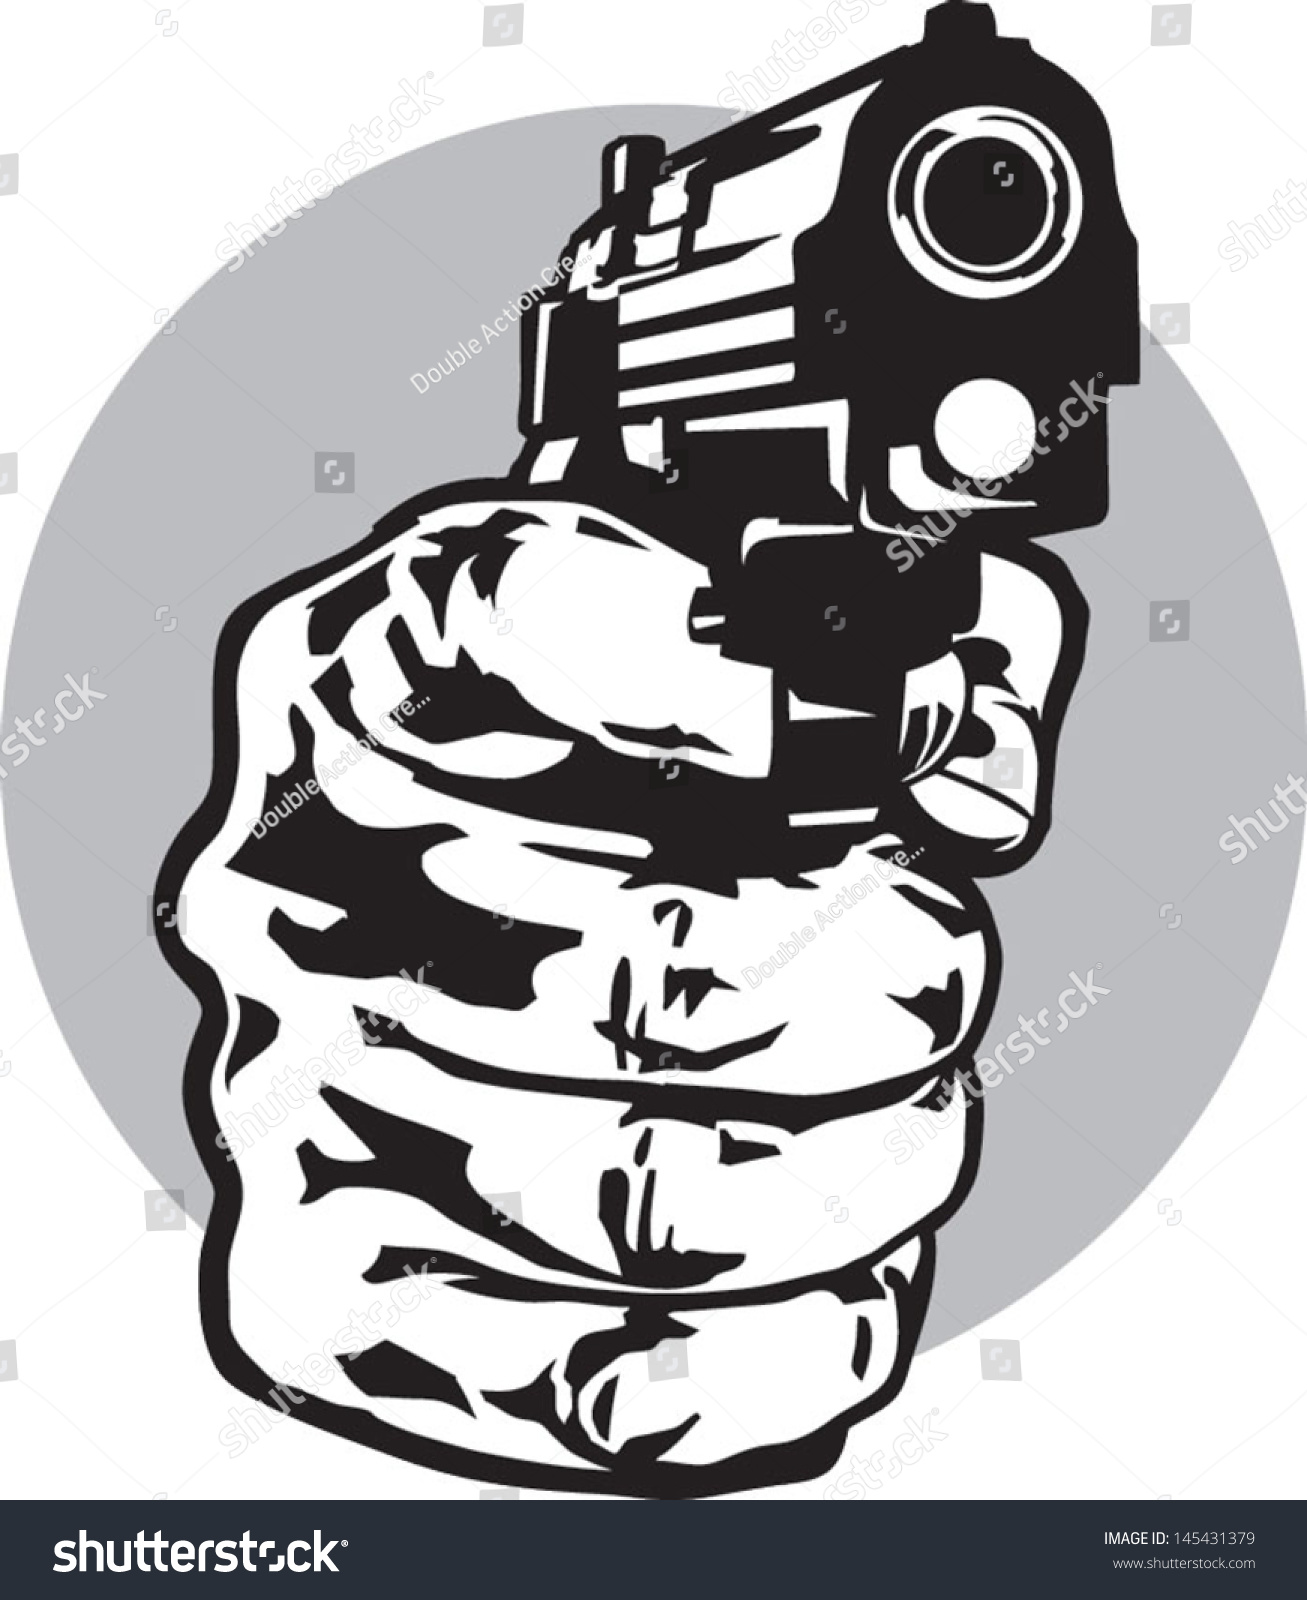 Hand With A Pistol Stock Vector Illustration 145431379 : Shutterstock